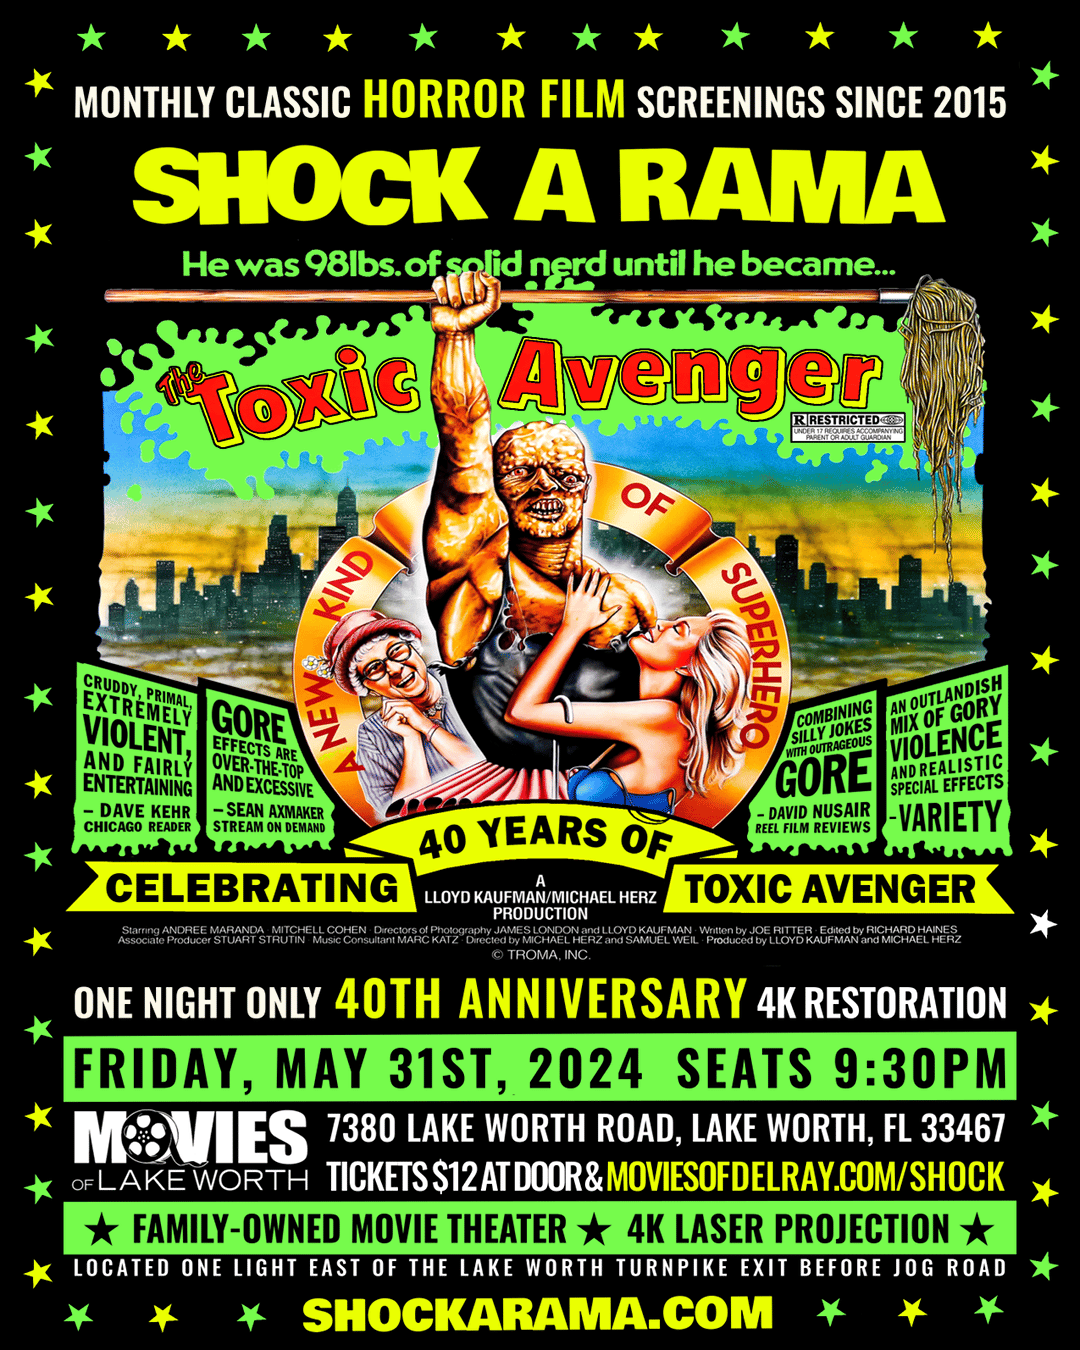 shock a rama the toxic avenger 40th anniversary friday may 31 movies of lake worth 930pm tickets 12 dollars